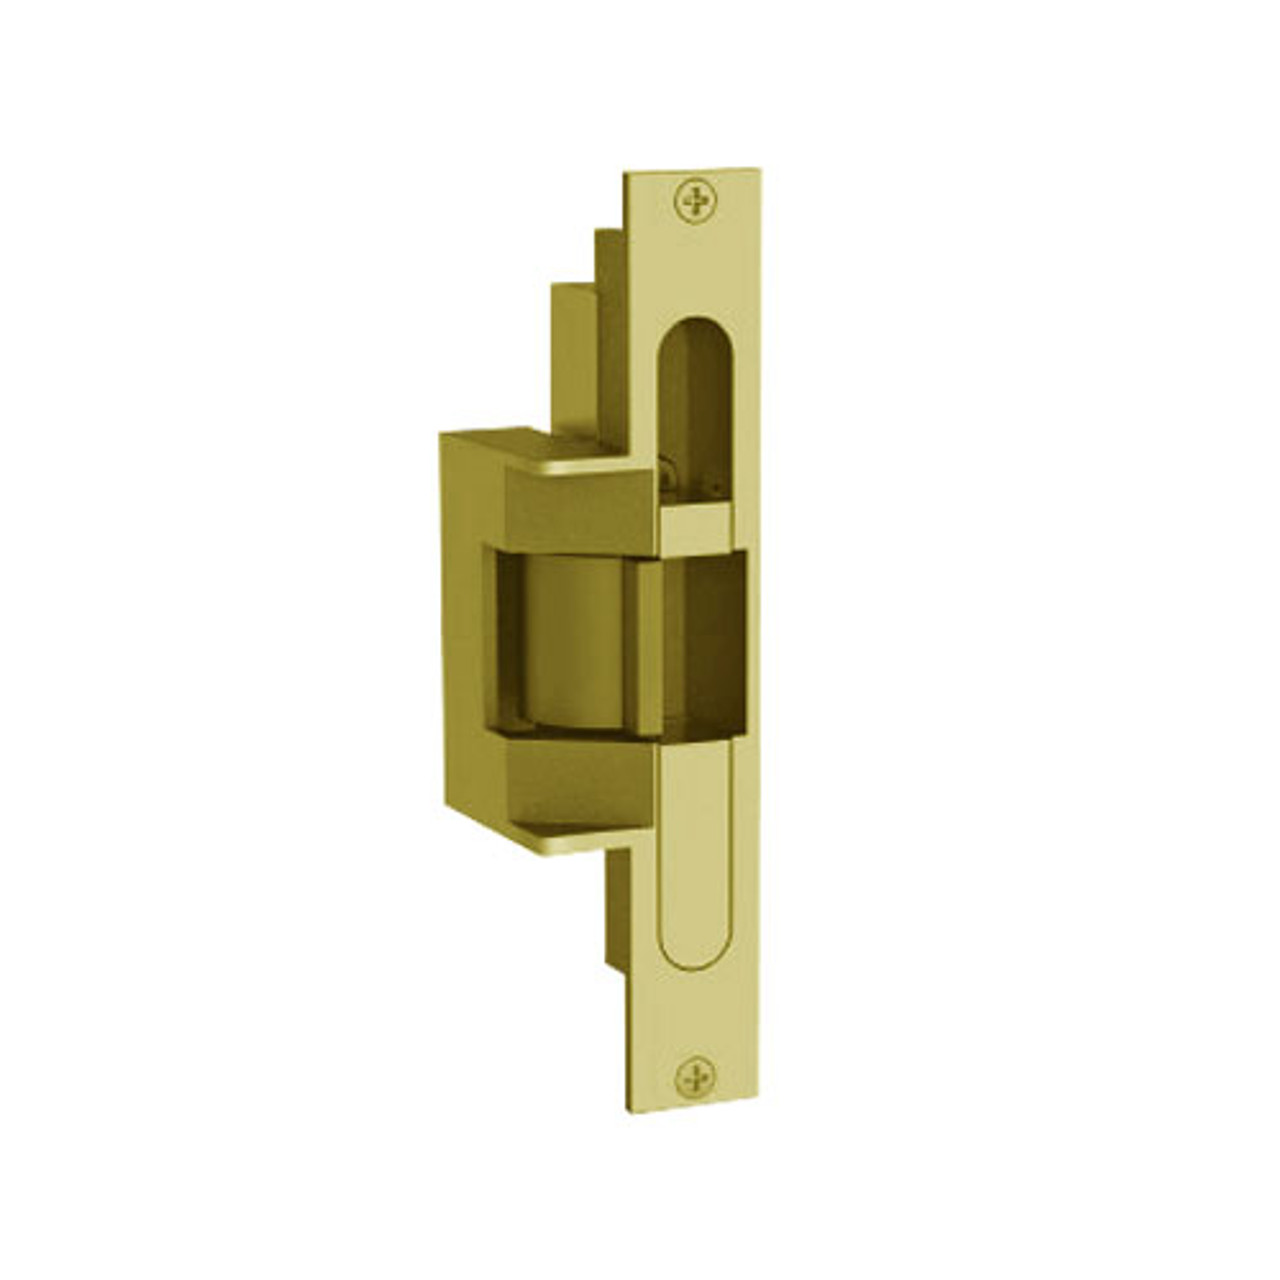 310-3-1-12D-LCBMA-606 Folger Adam Electric Strike with Latchbolt and Locking Cam Monitor in Satin Brass